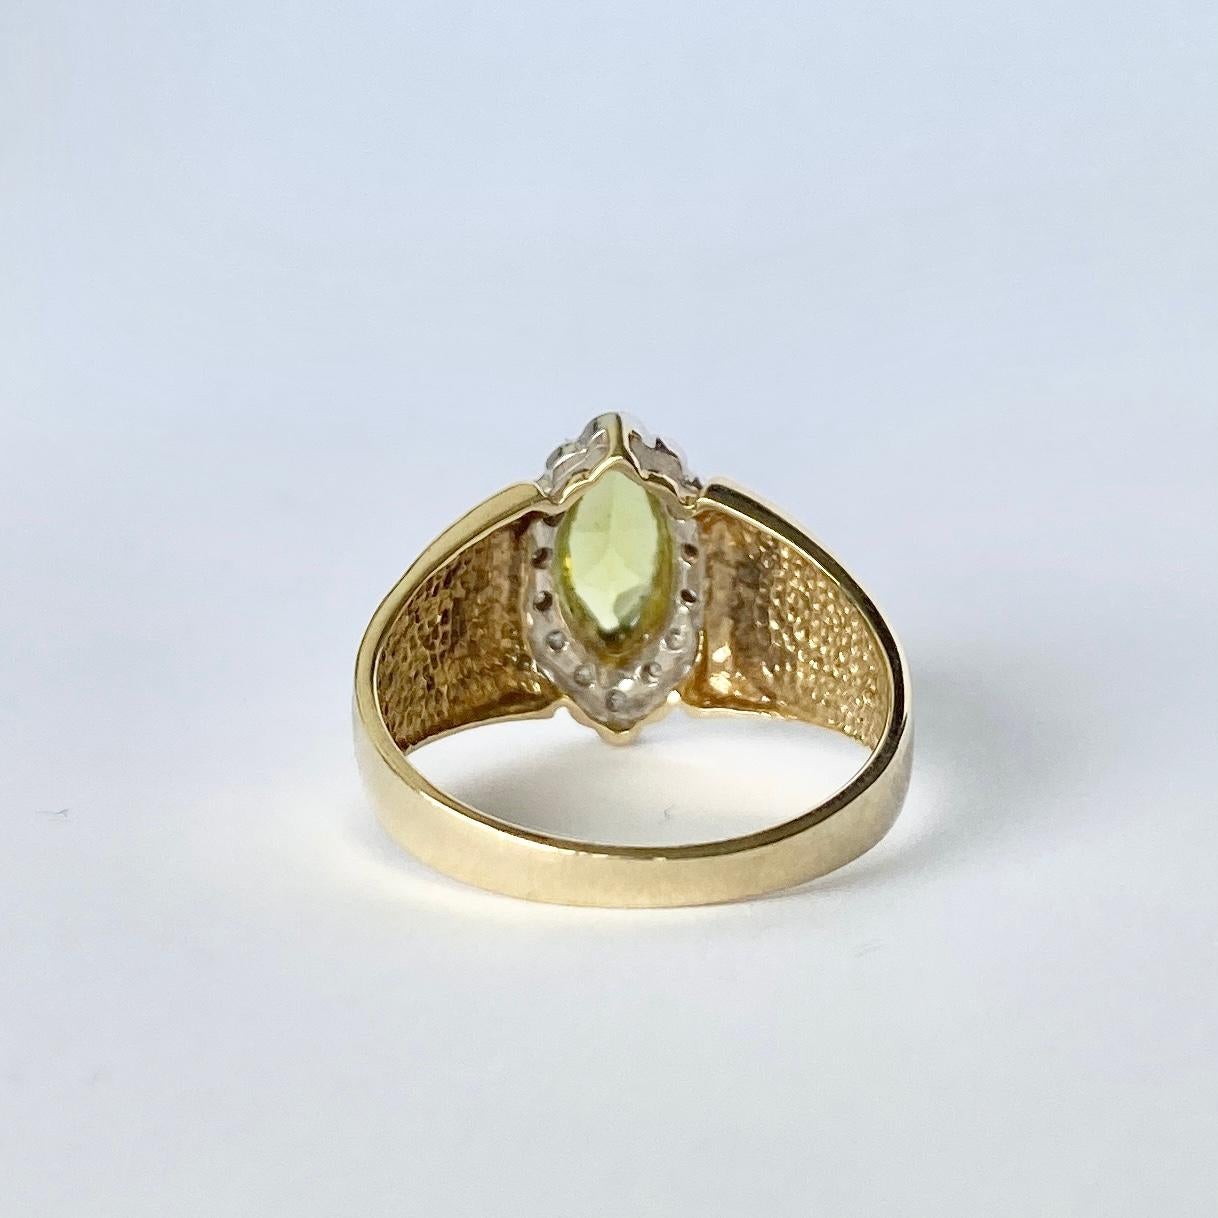 This chunky peridot ring is modelled in 9ct gold. Surrounding the green stone there are Diamond points. The peridot measures approx 75pts and the diamonds total approx 15pts.

Ring Size: R or 8 1/2 
Height Off Finger: 7mm 

Weight: 4g